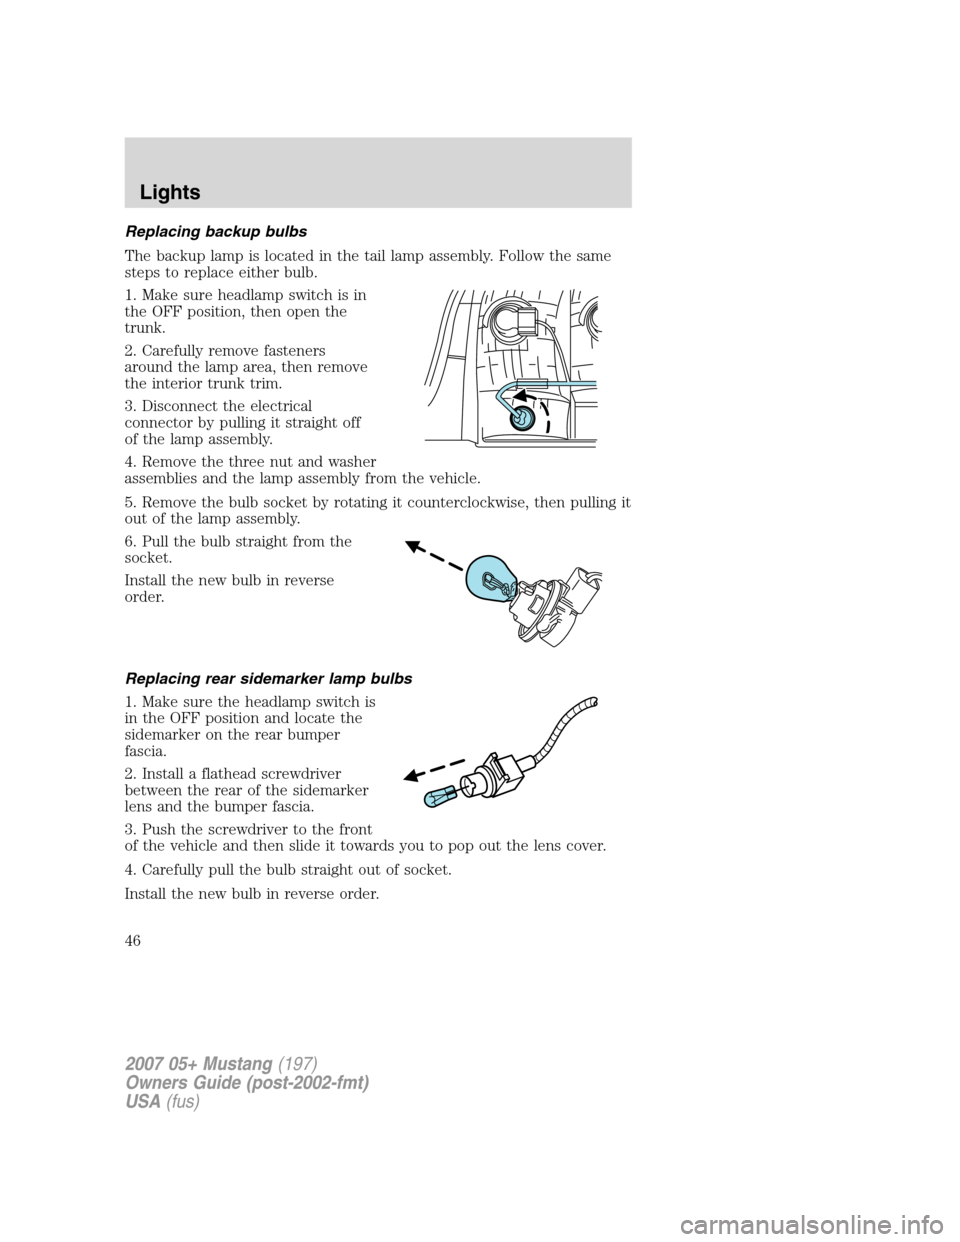 FORD MUSTANG 2007 5.G Owners Manual Replacing backup bulbs
The backup lamp is located in the tail lamp assembly. Follow the same
steps to replace either bulb.
1. Make sure headlamp switch is in
the OFF position, then open the
trunk.
2. 